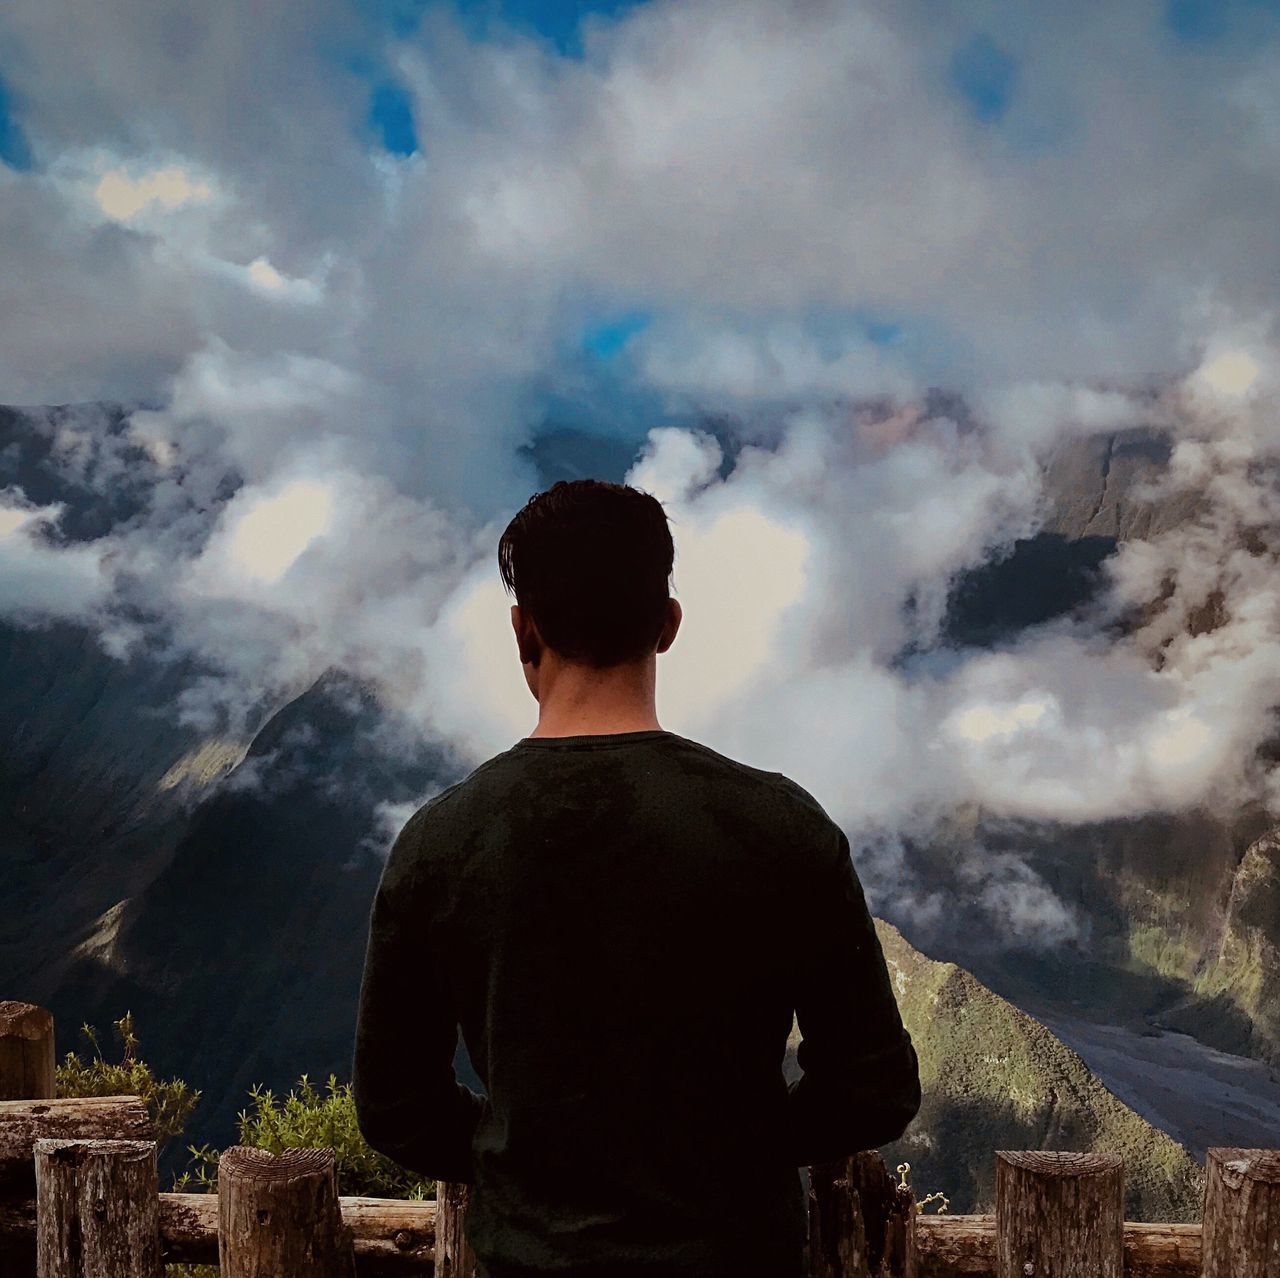 rear view, cloud - sky, one person, real people, sky, leisure activity, men, lifestyles, standing, smoke - physical structure, nature, mountain, casual clothing, waist up, day, beauty in nature, looking at view, three quarter length, scenics - nature, outdoors